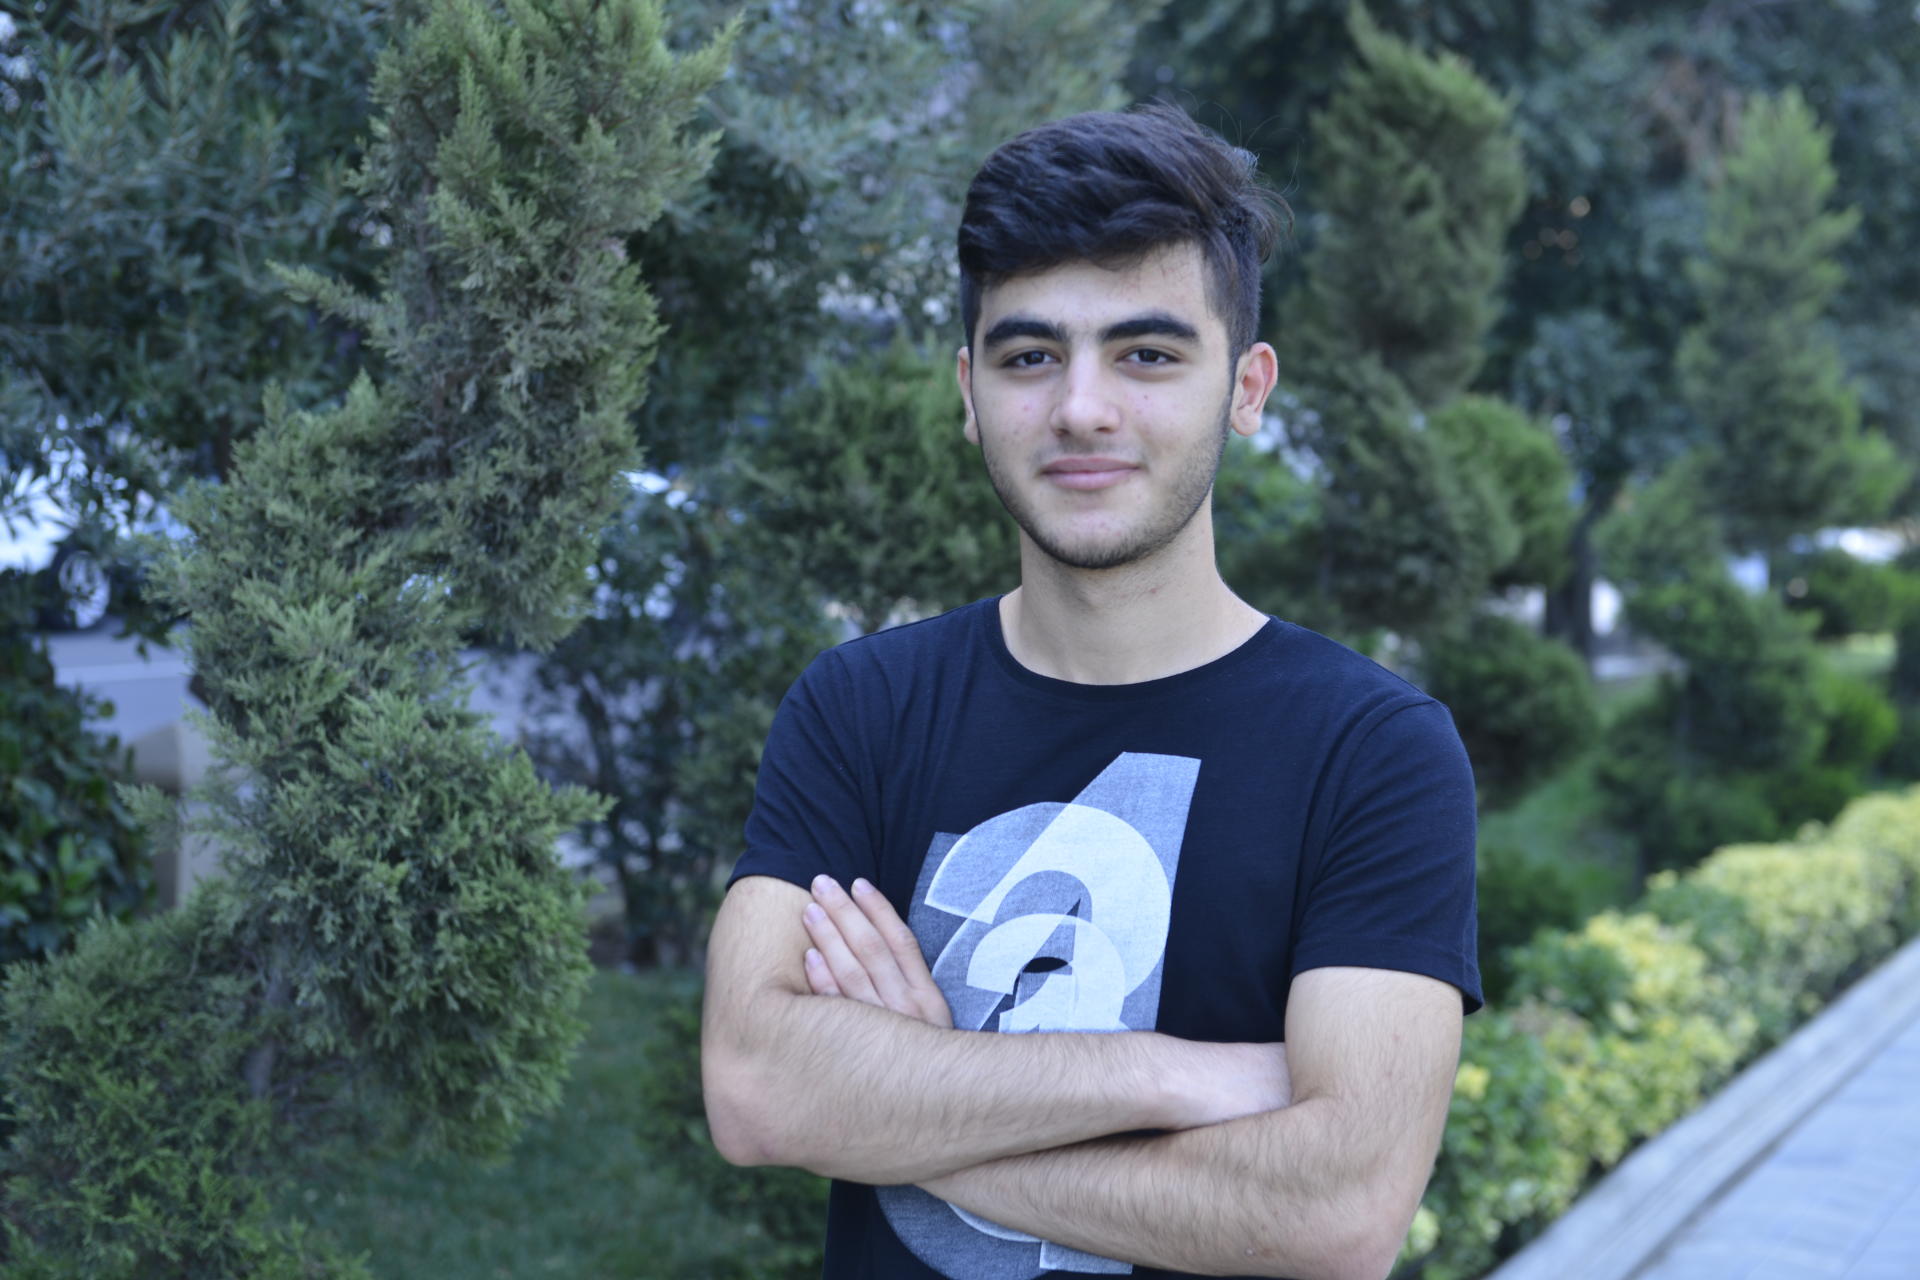 BHOS is ideal university for engineering students in Azerbaijan - student